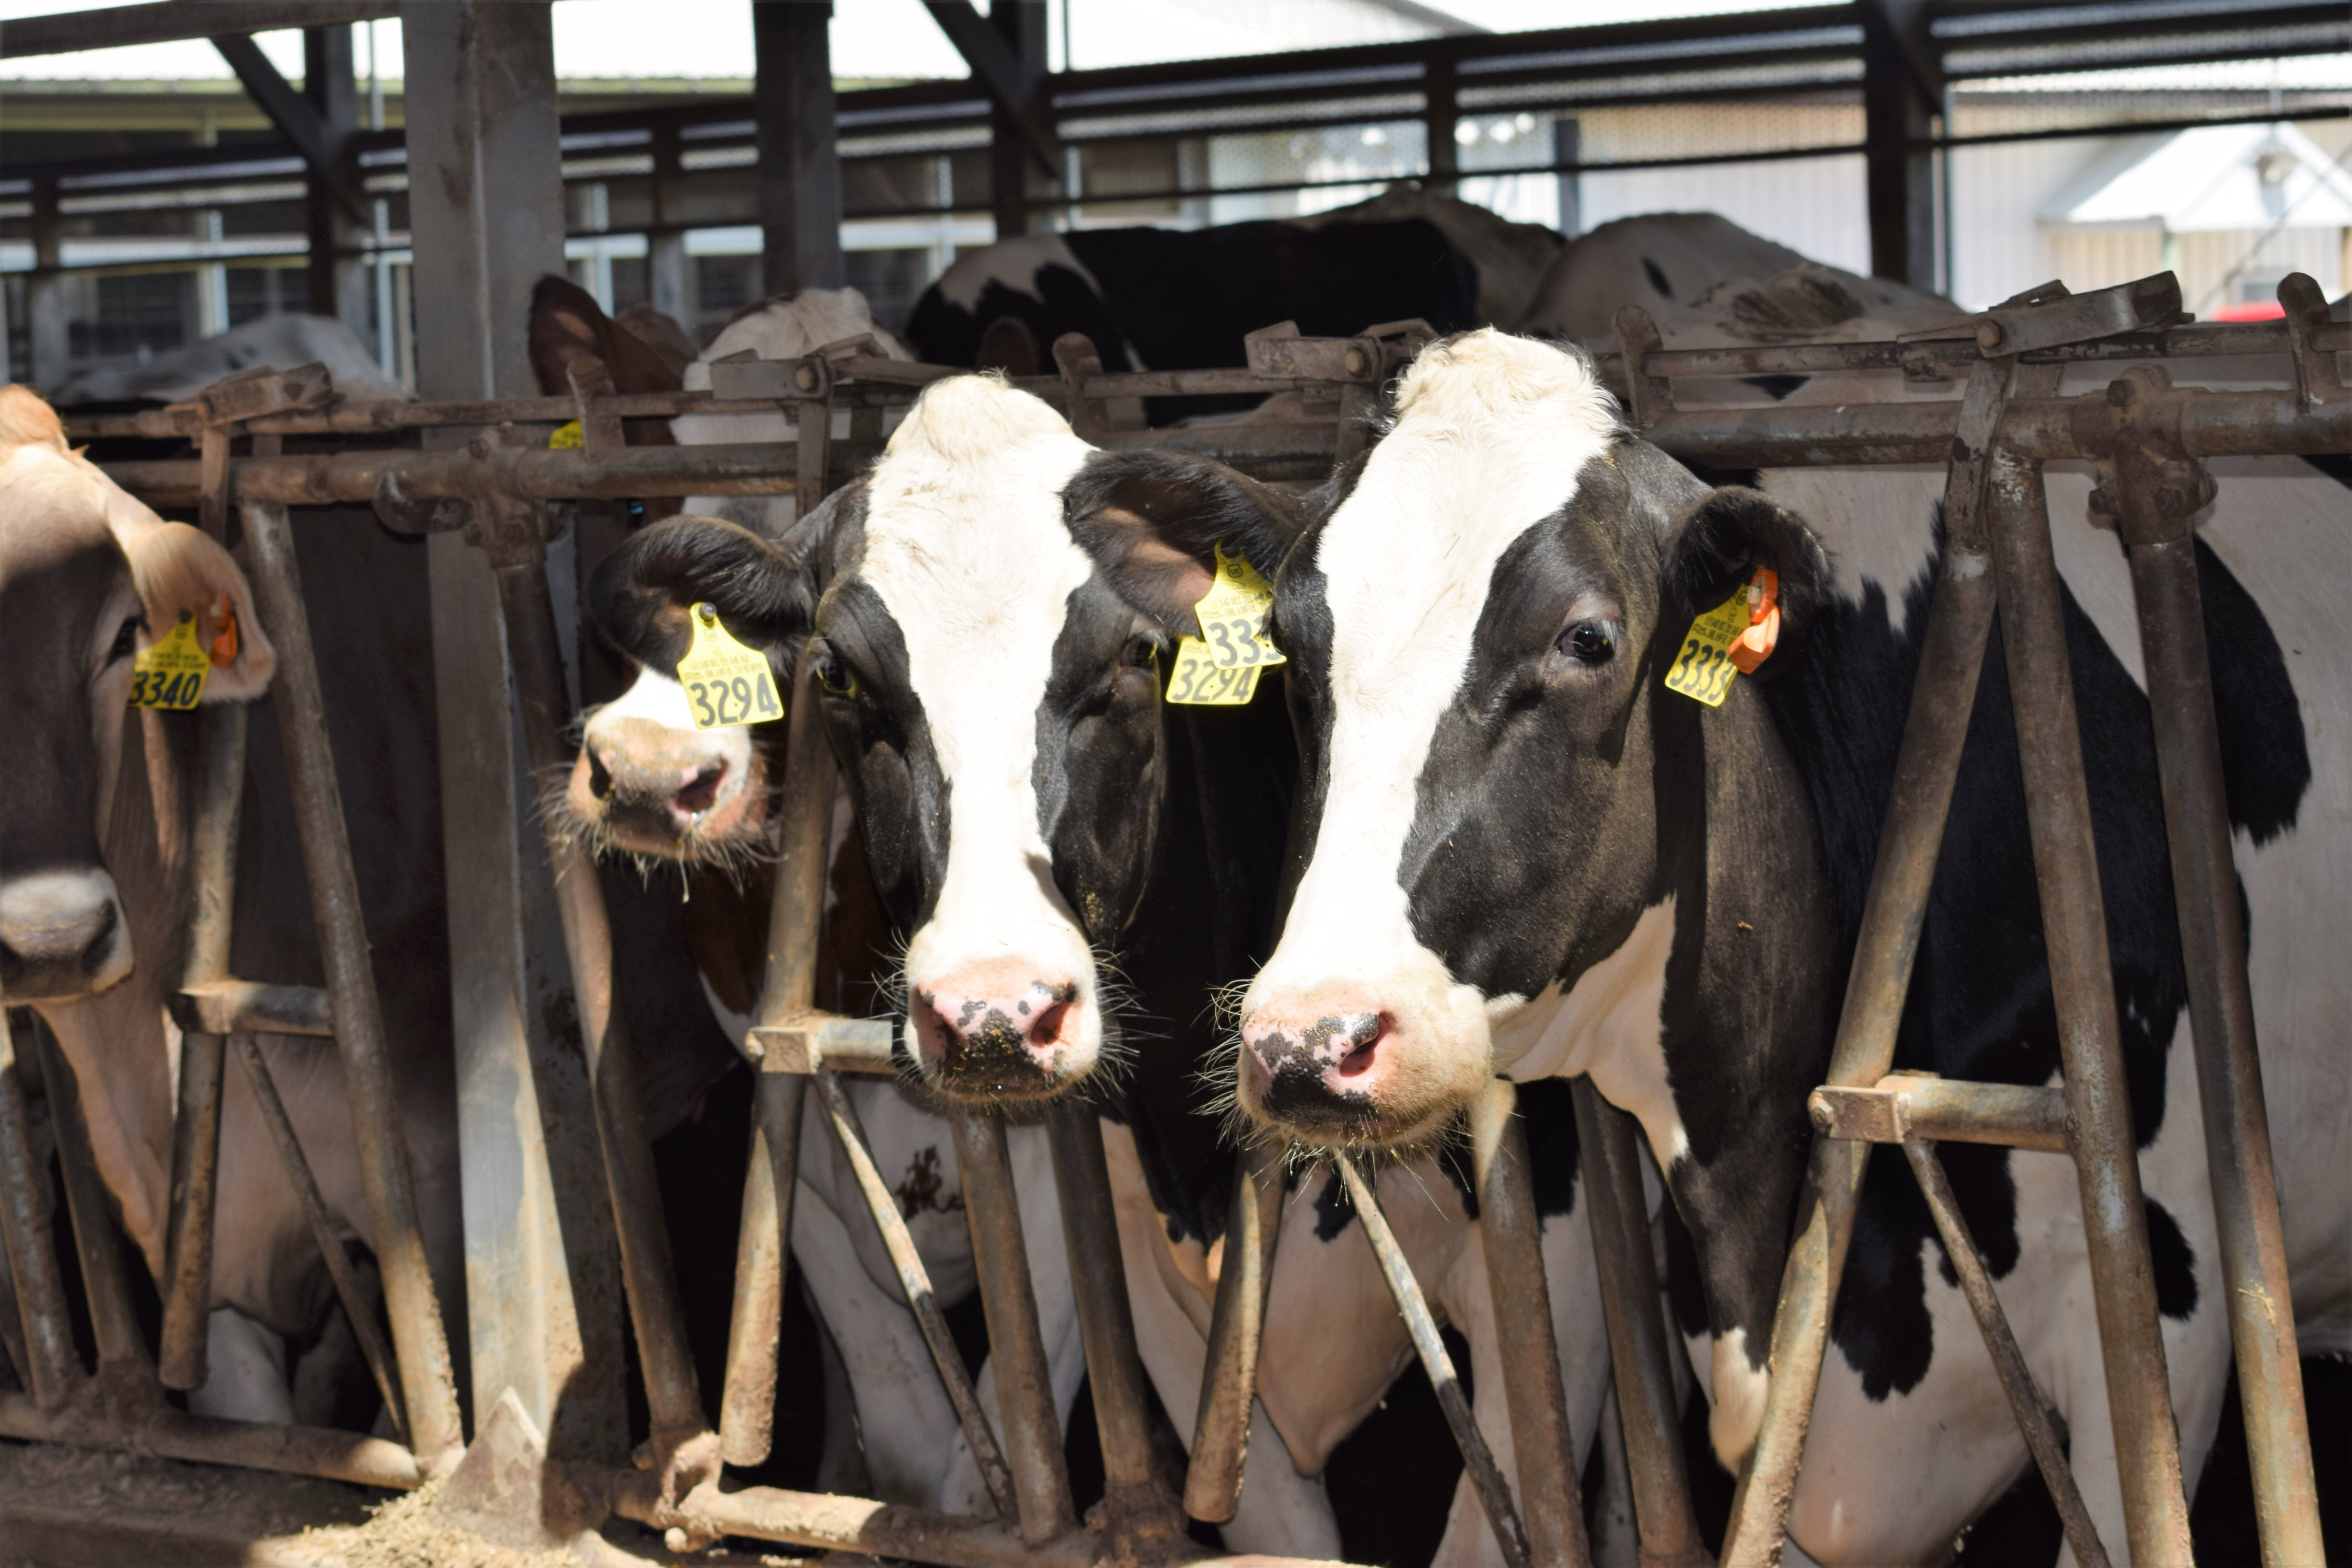 Avian influenza detected in dairy cattle, no threat to dairy products or meat